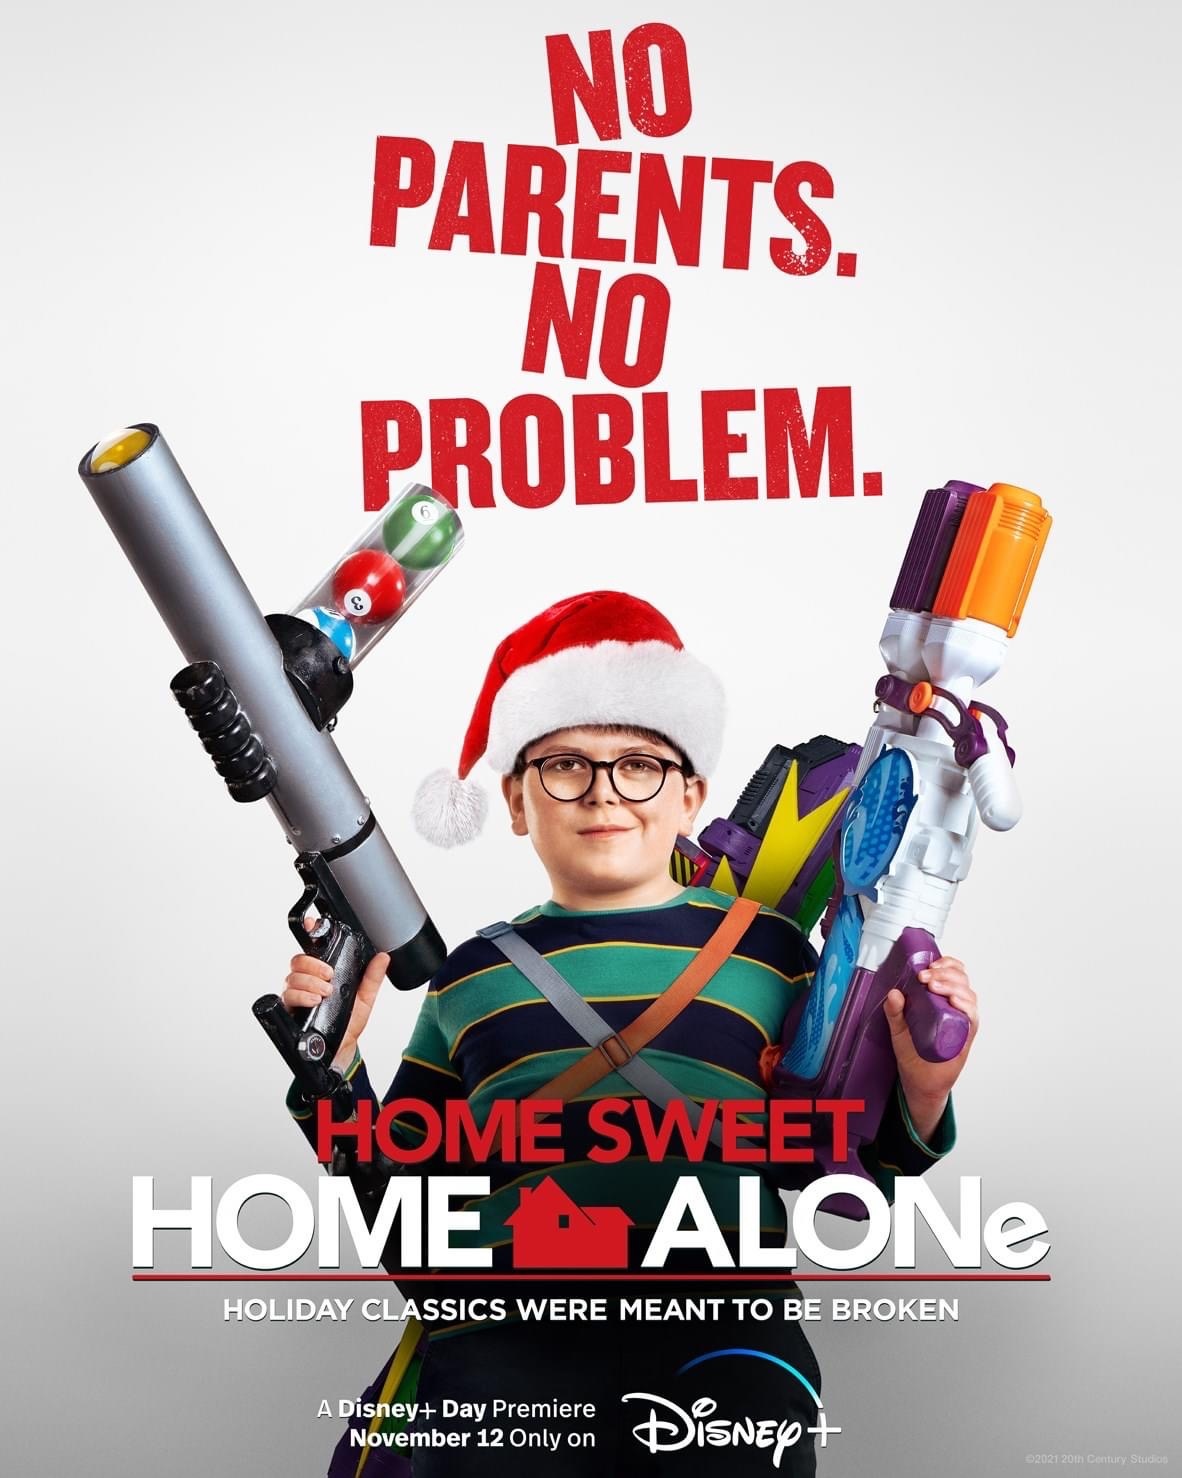 New Movie: “HOME SWEET HOME ALONE”